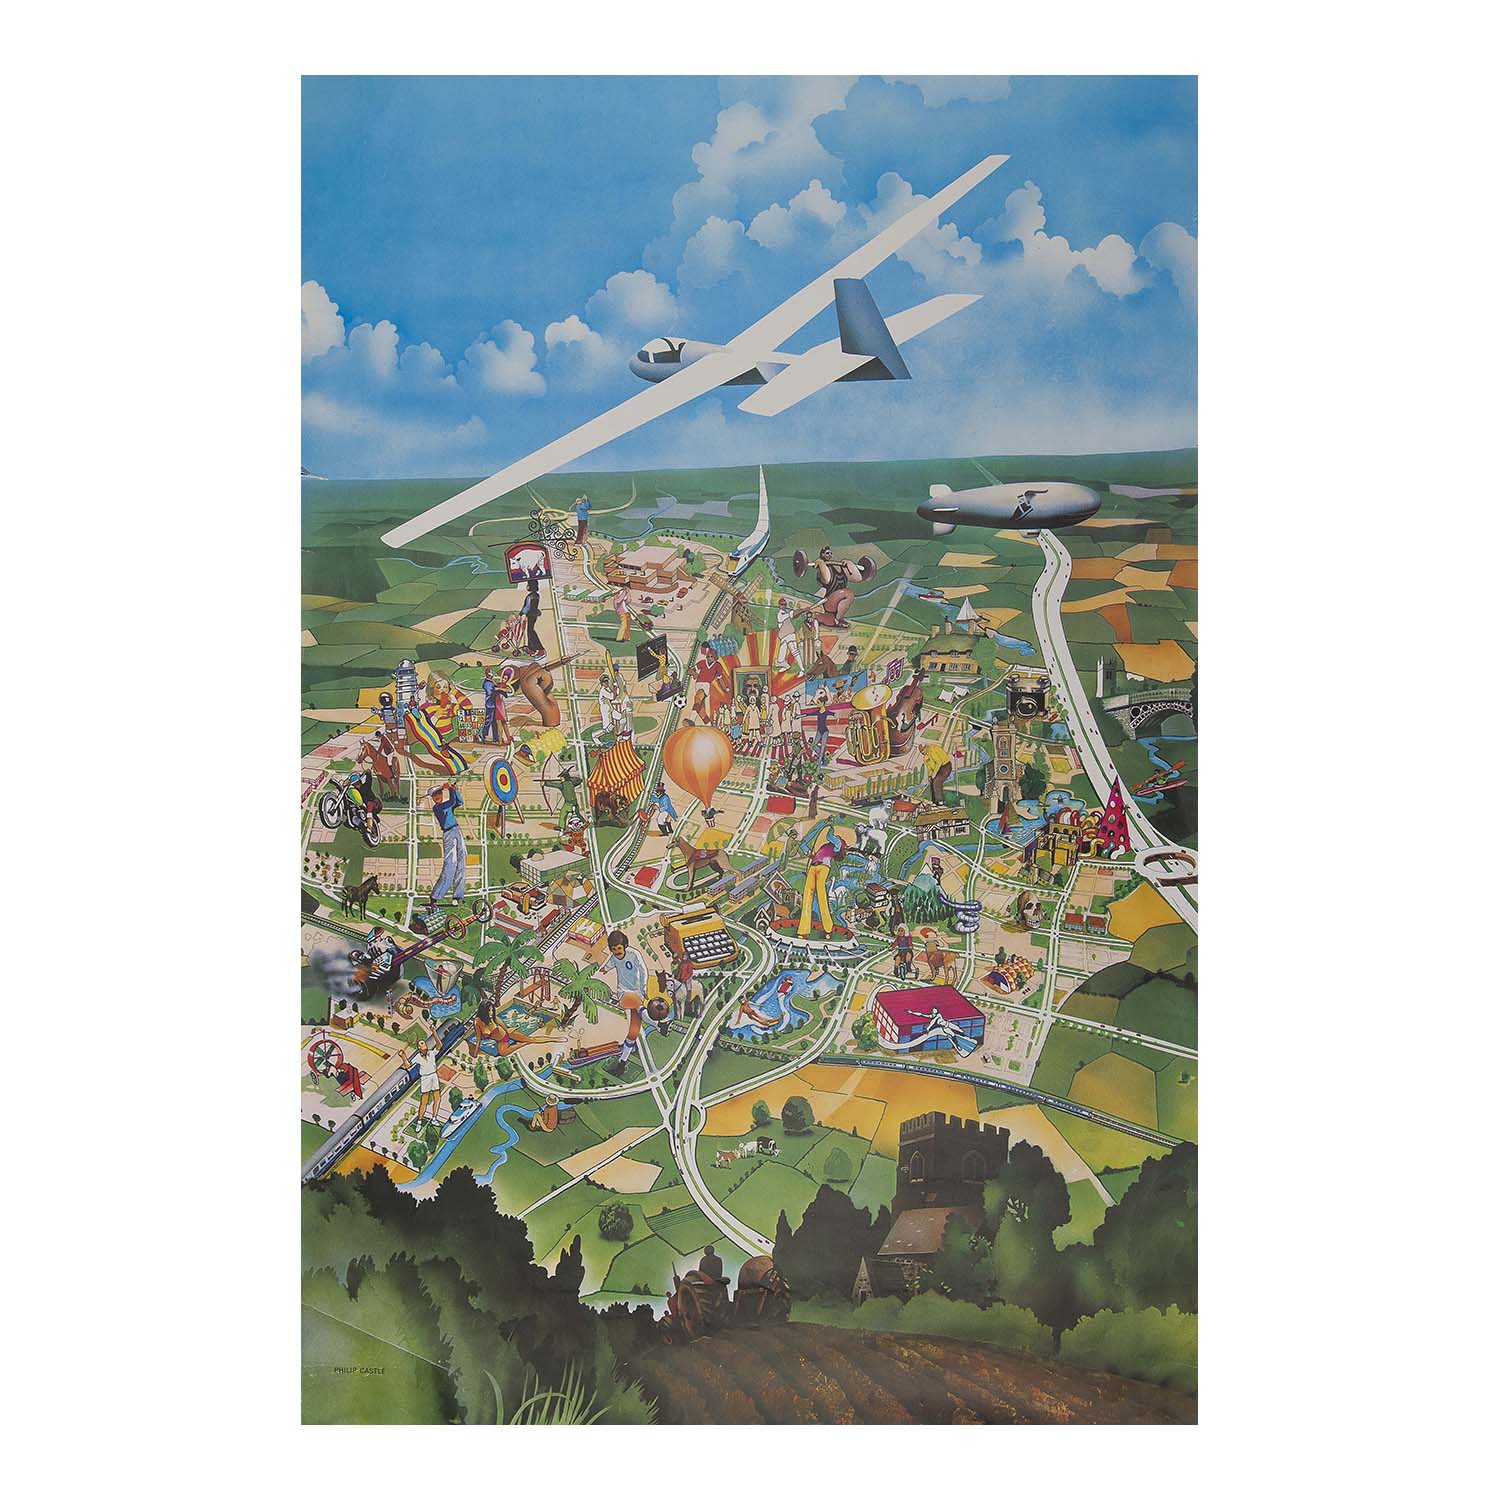 poster, Leisure in Milton Keynes by Philip Castle, Milton Keynes Development Corporation, 1971. Two-sided poster showing the proposed leisure facilities for the then unbuilt town